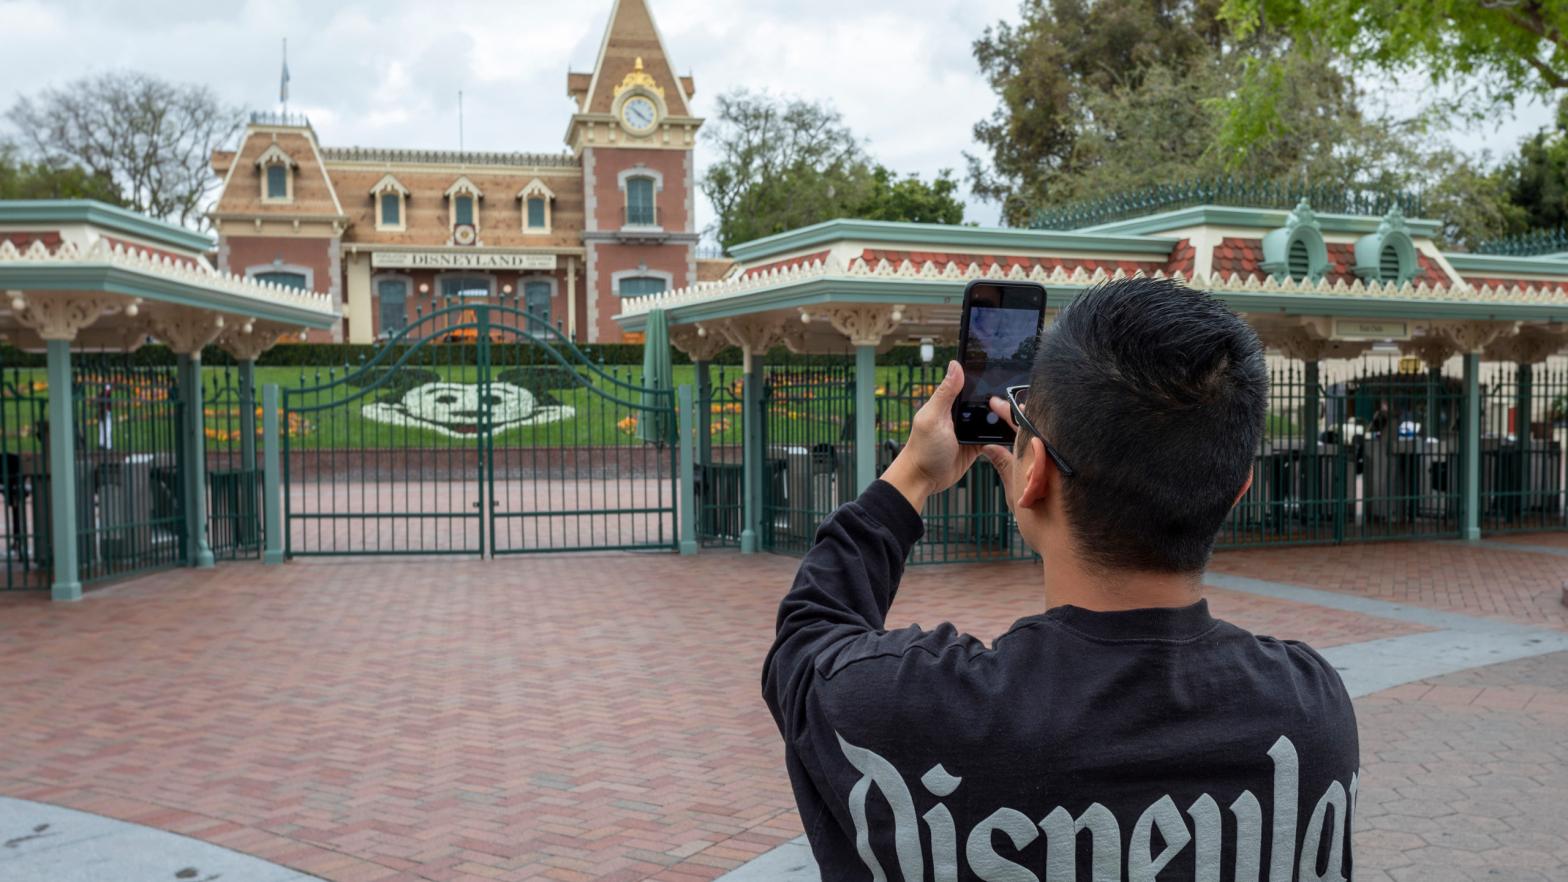 A man takes a photo on the first day of the closure of Disneyland and Disney California Adventure theme parks on March 14, 2020.  (Photo: David McNew/AFP, Getty Images)